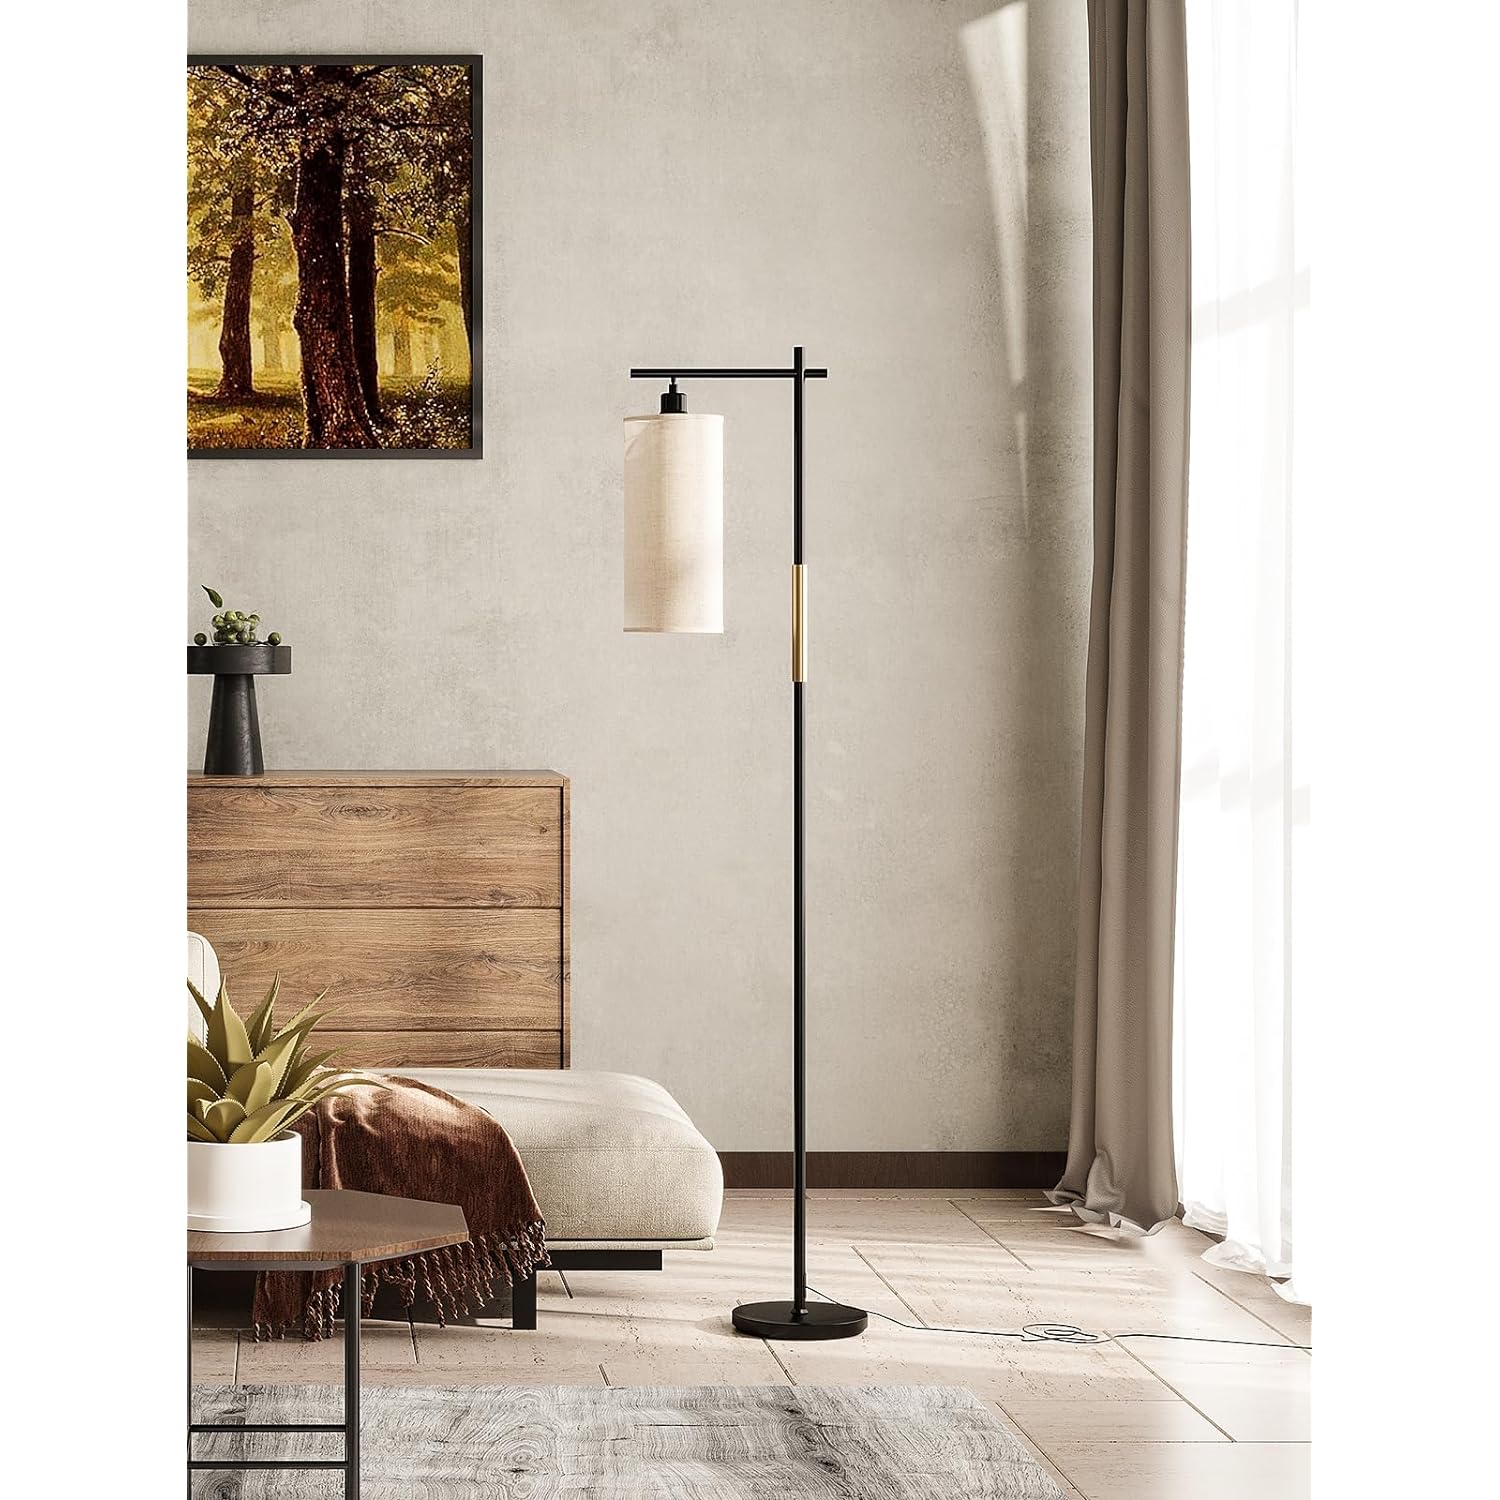 thinkstar Led Dimmable Floor Lamp For Living Room, Standing Lamp With Linen Lampshade, Modern Floor Lamps, Bright Tall Lamp For Be…